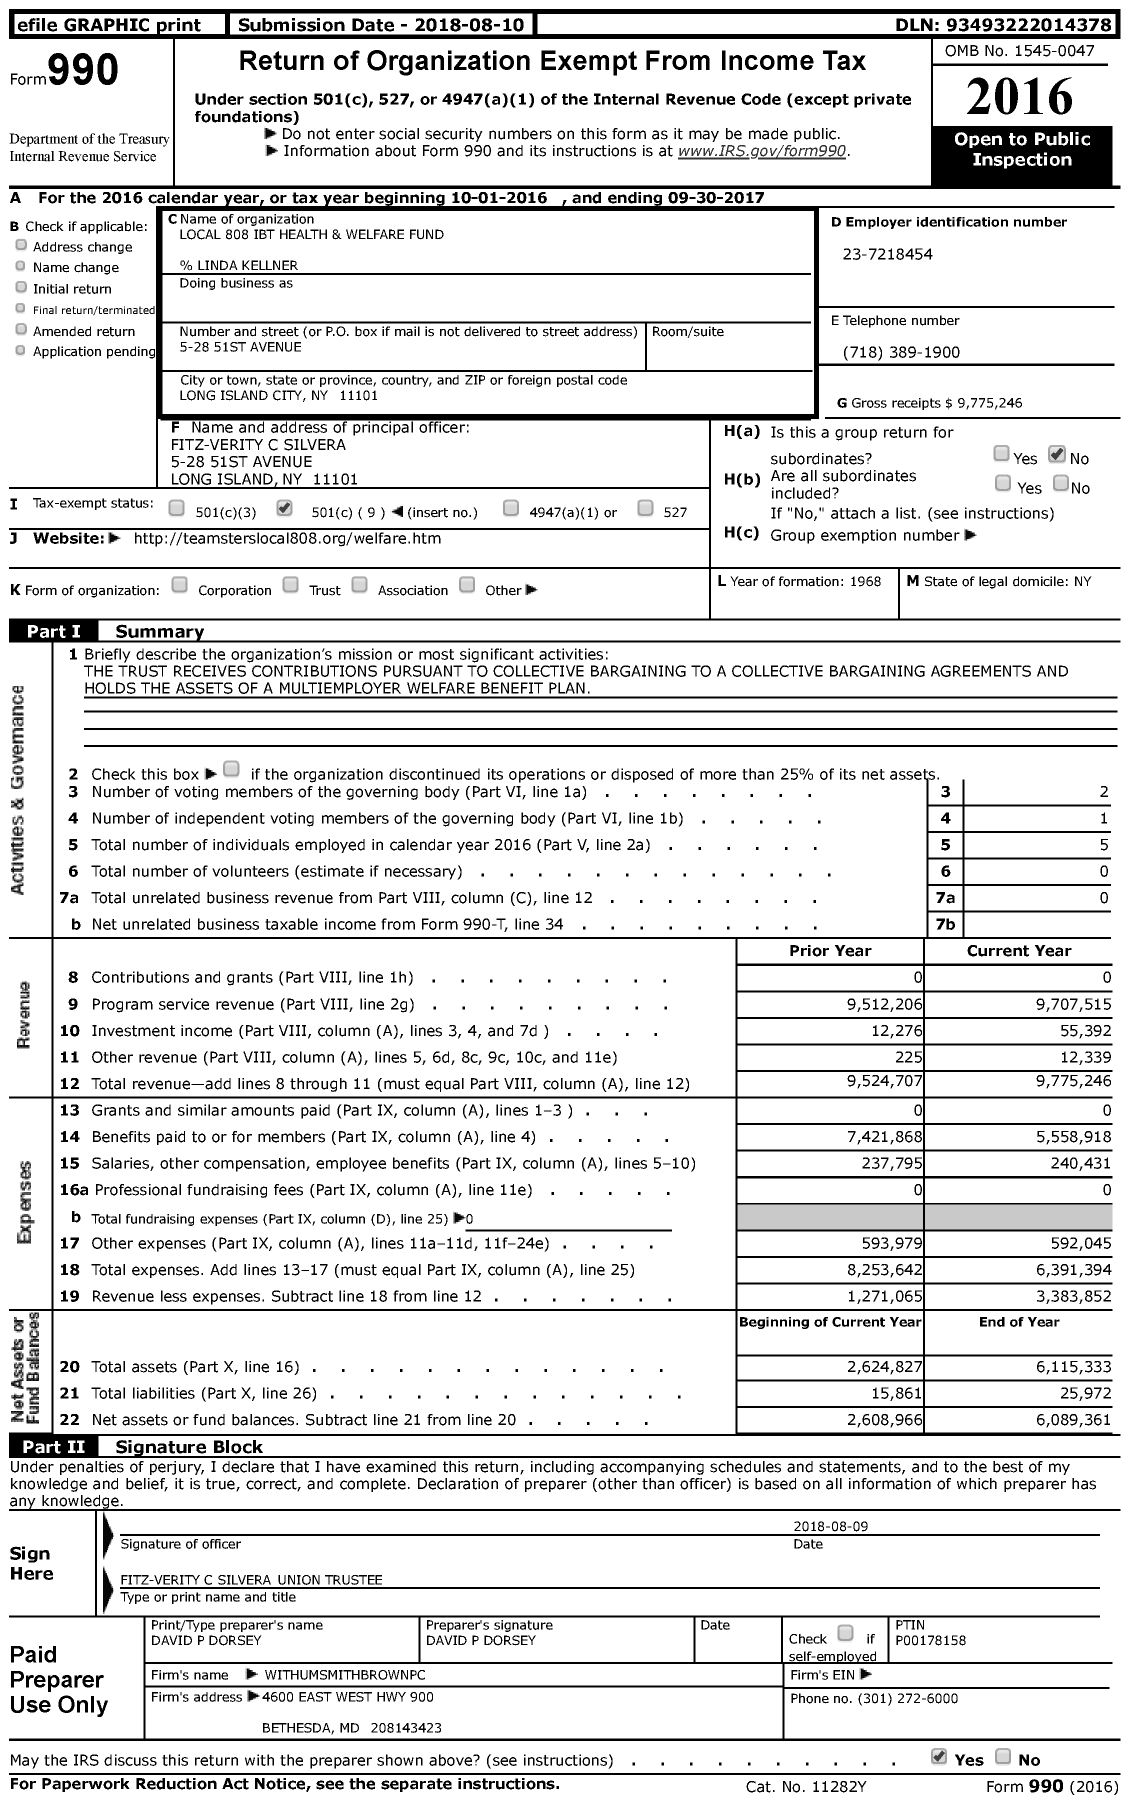 Image of first page of 2016 Form 990 for Local 808 Ibt Health and Welfare Fund